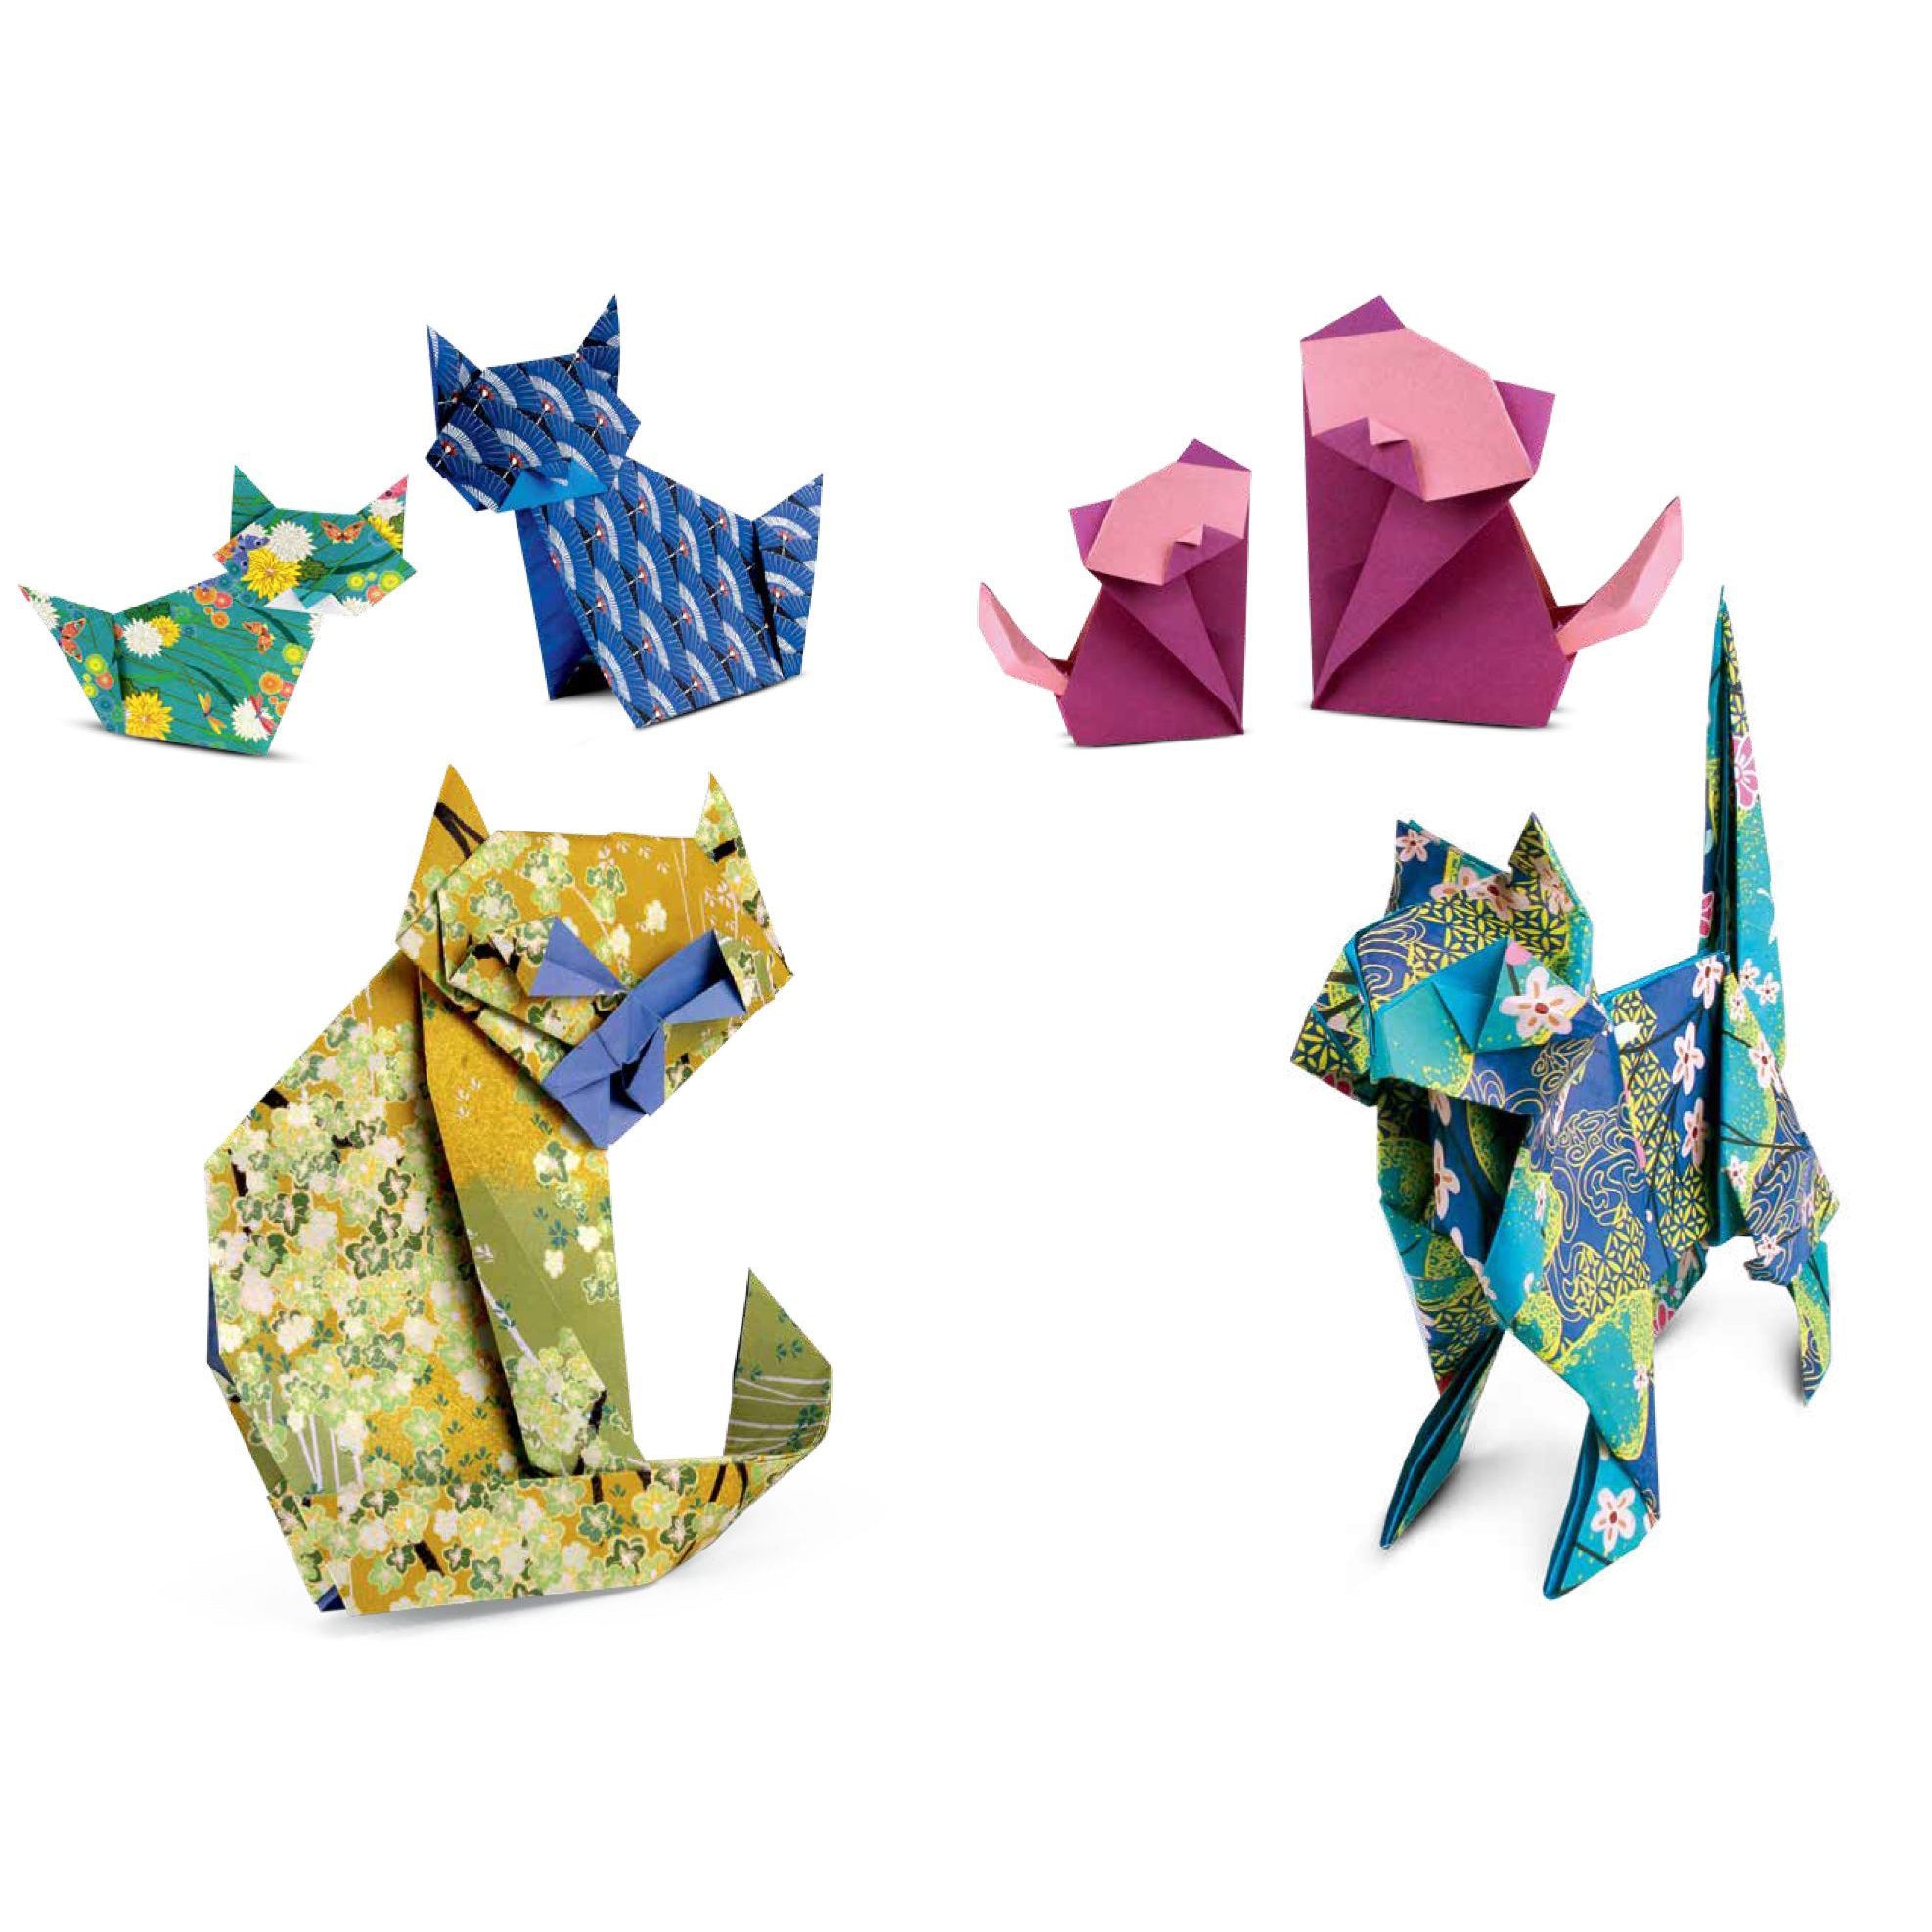 Cats in origami